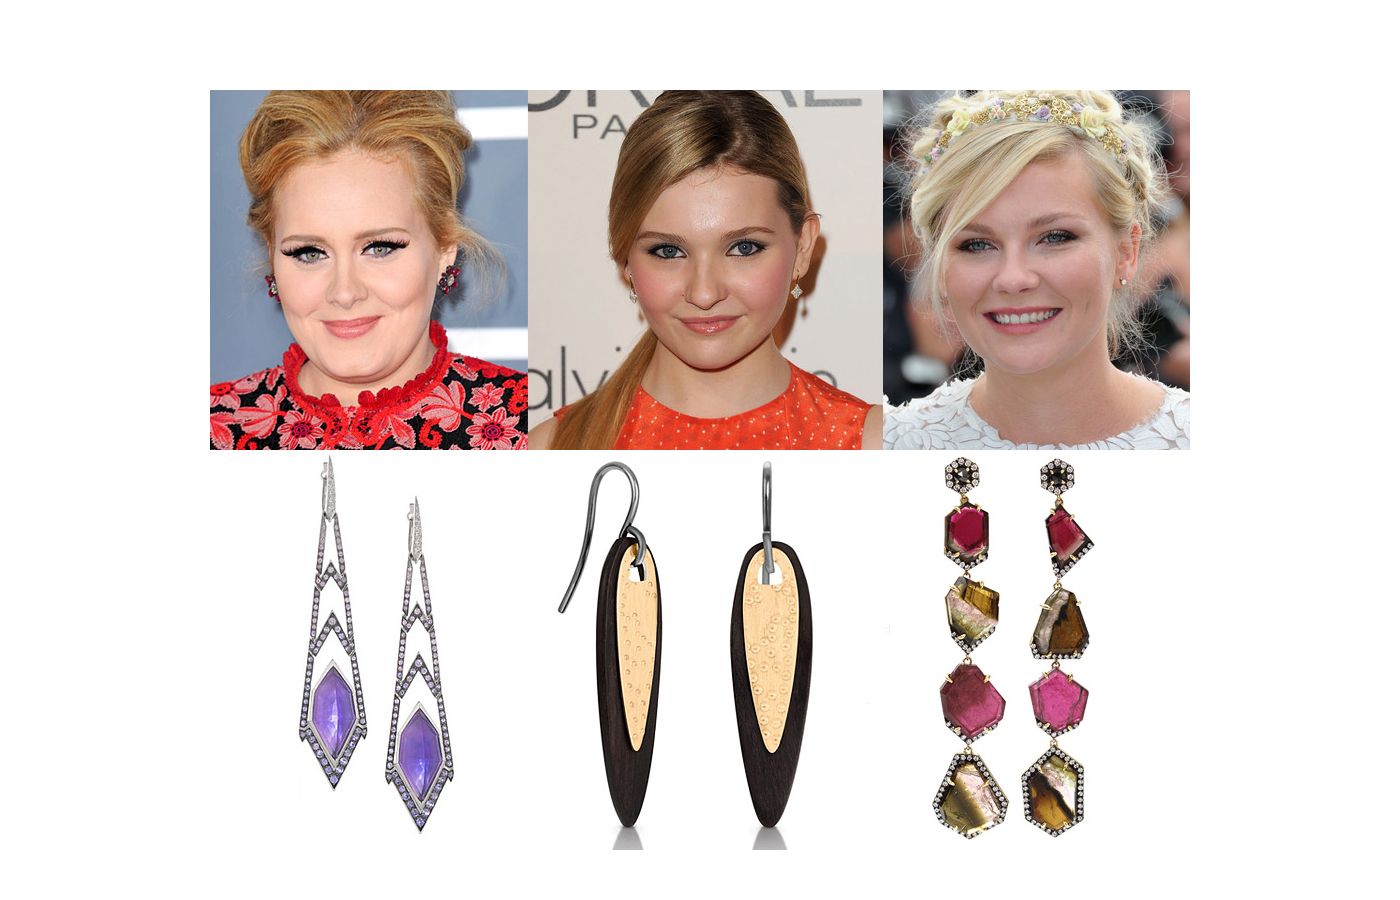 How to Choose Earrings for Your Face Shape - Kyllonen